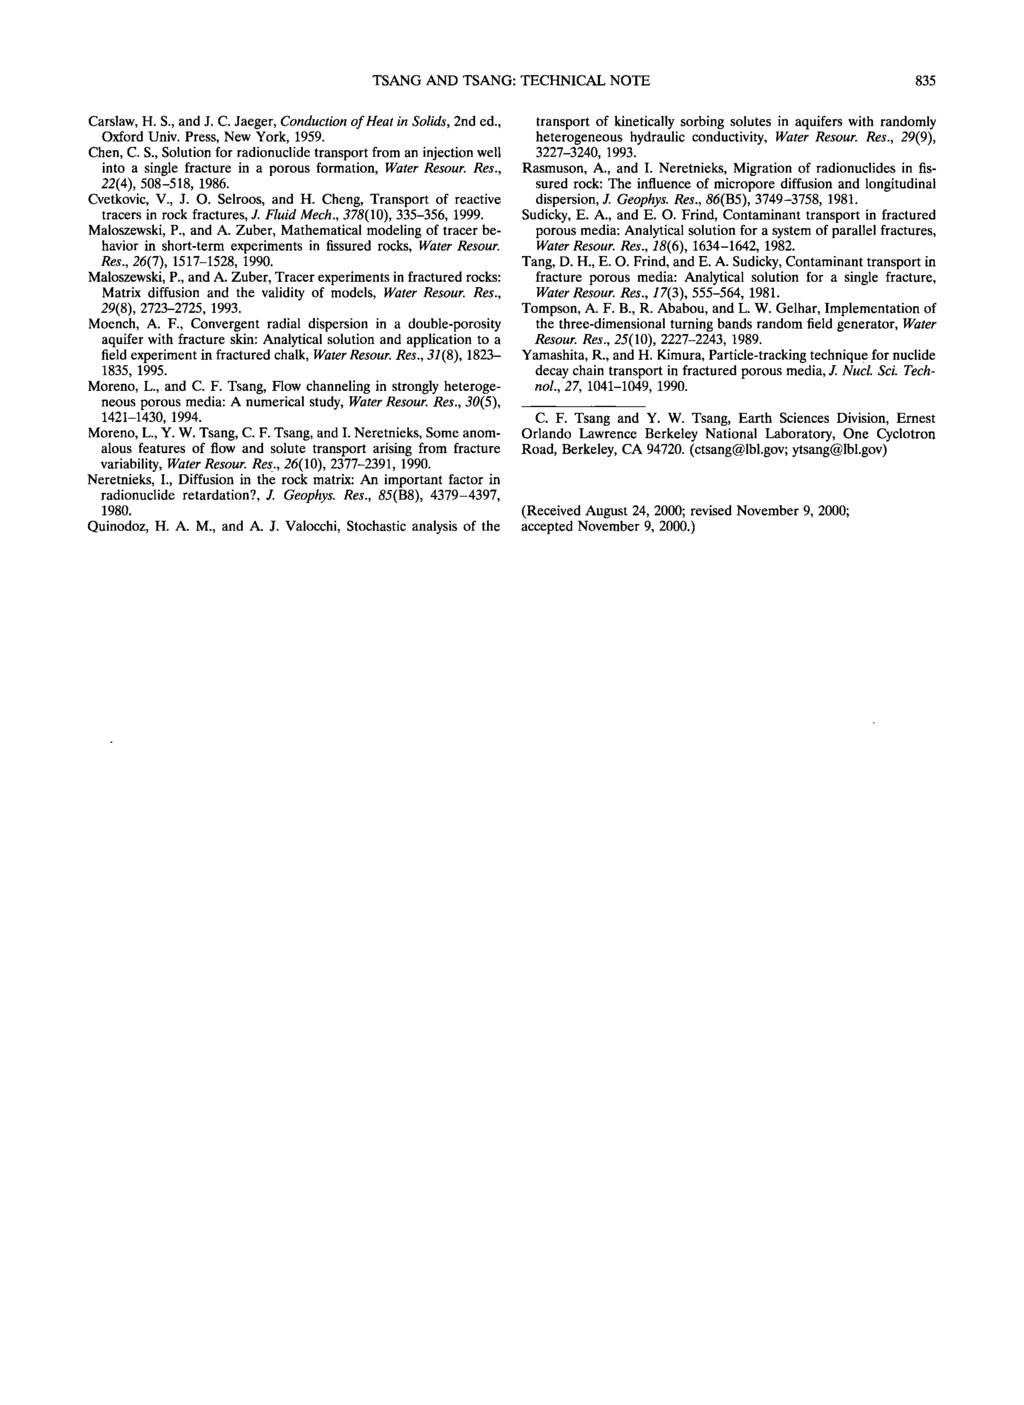 TSANG AND TSANG: TECHNICAL NOTE 835 Carslaw, H. S., and J. C. Jaeger, Conduction of Heat in Solids, 2nd ed., Oxford Univ. Press, New York, 1959. Chen, C. S., Solution for radionuclide transport from an injection well into a single fracture in a porous formation, Water Resour.